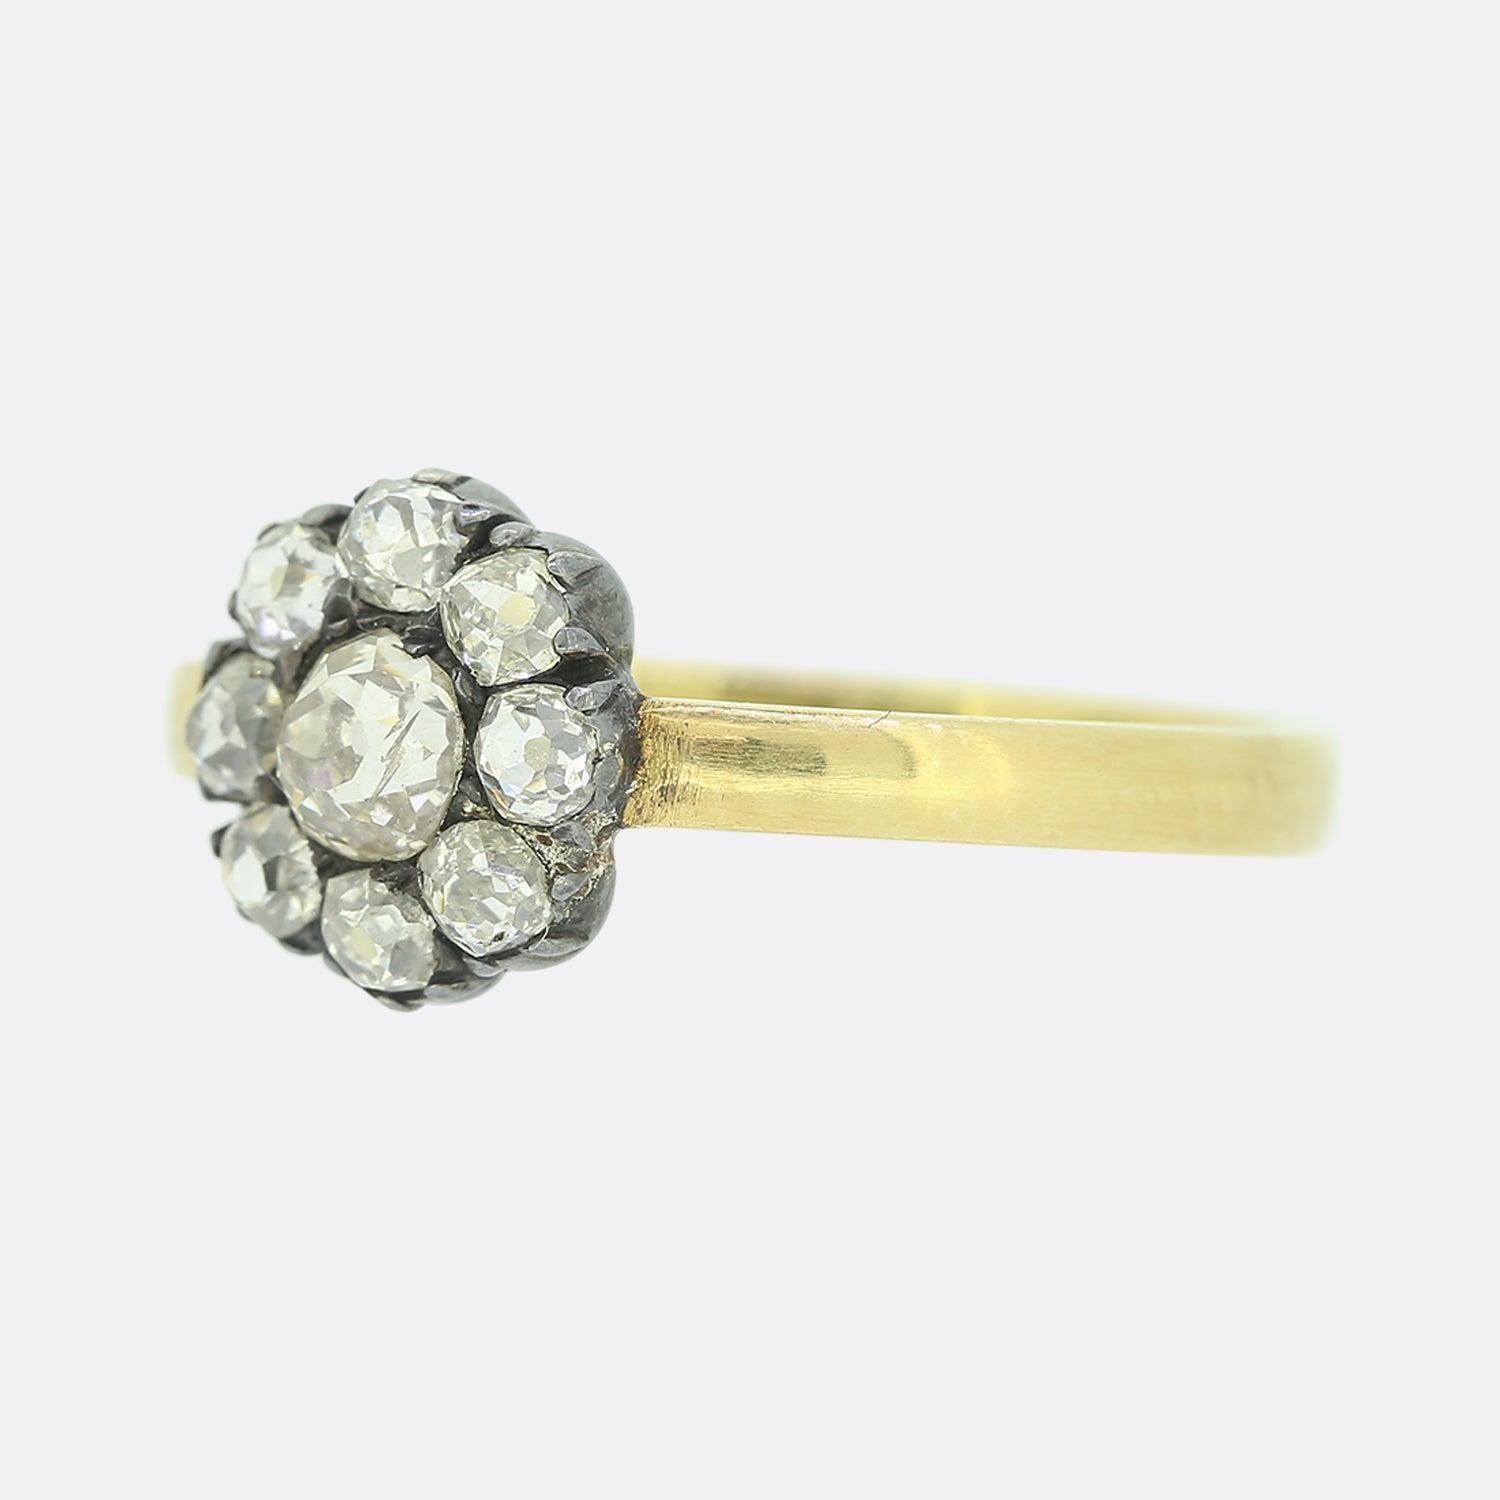 This is a truly wonderful antique diamond cluster ring. The head of the ring dates back to the Victorian era and the diamonds are all bright white chunky old cuts. The central diamond is larger than the surrounding stones and weighs approximately